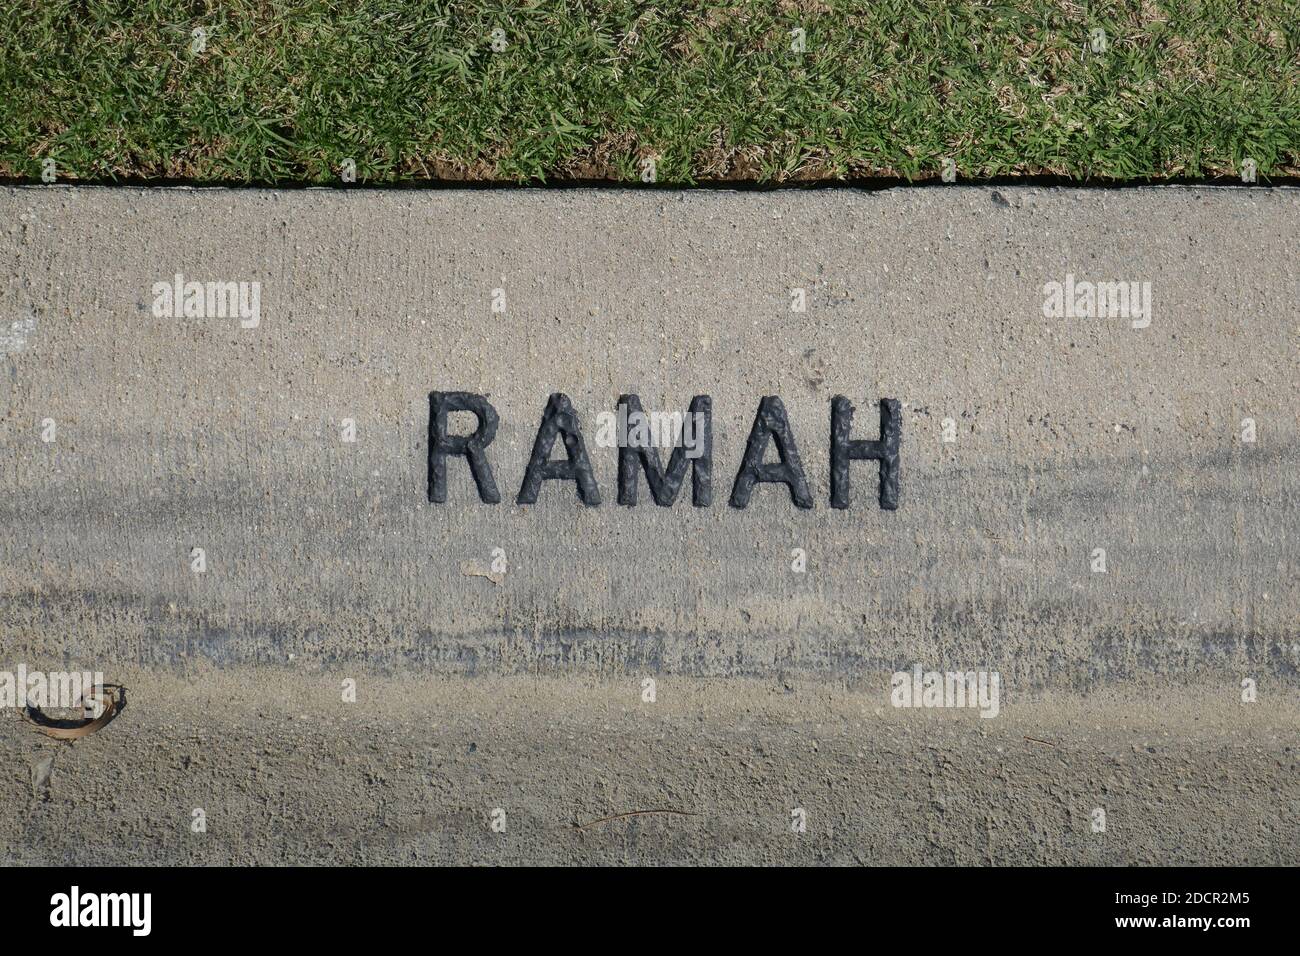 Los Angeles, California, USA 17th November 2020 A general view of atmosphere of Ramah Section at Mount Sinai Cemetery Hollywood Hills on November 17, 2020 in Los Angeles, California, USA. Photo by Barry King/Alamy Stock Photo Stock Photo